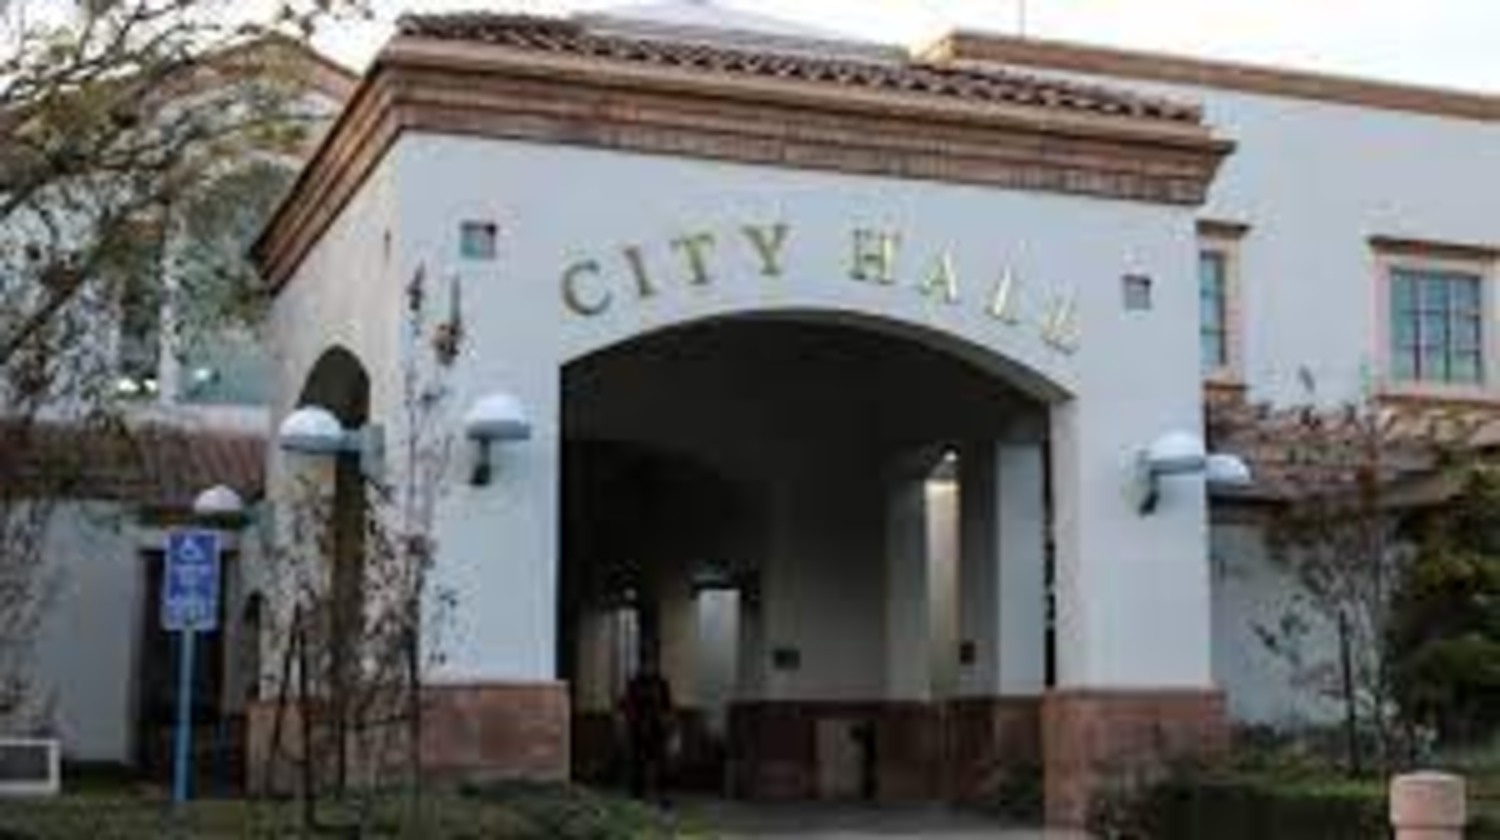 A building in Orange County with a City Hall sign on it.